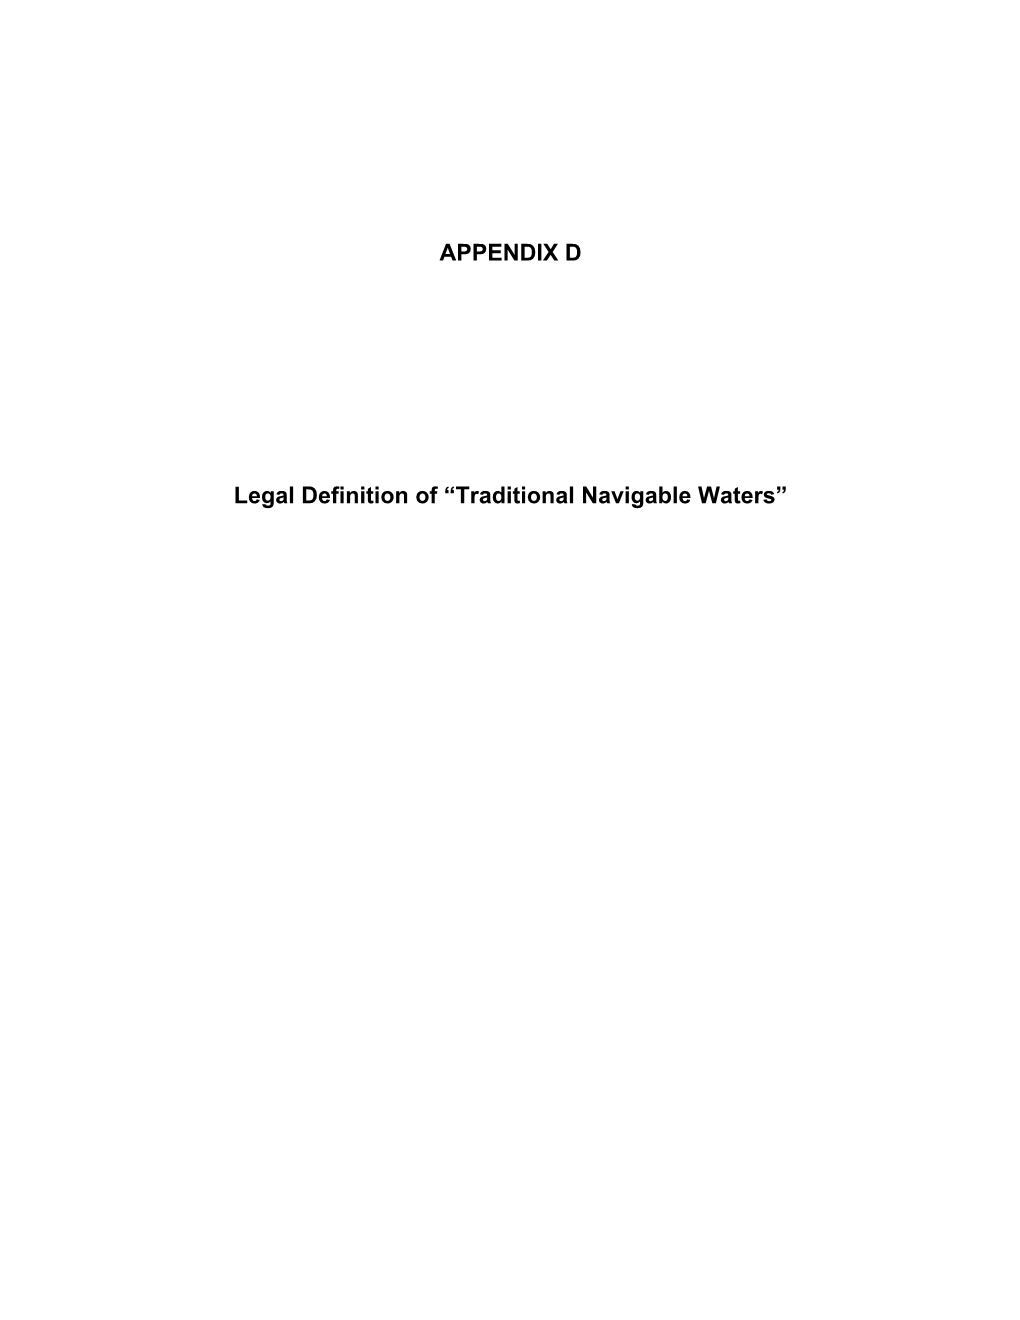 APPENDIX D Legal Definition of “Traditional Navigable Waters”